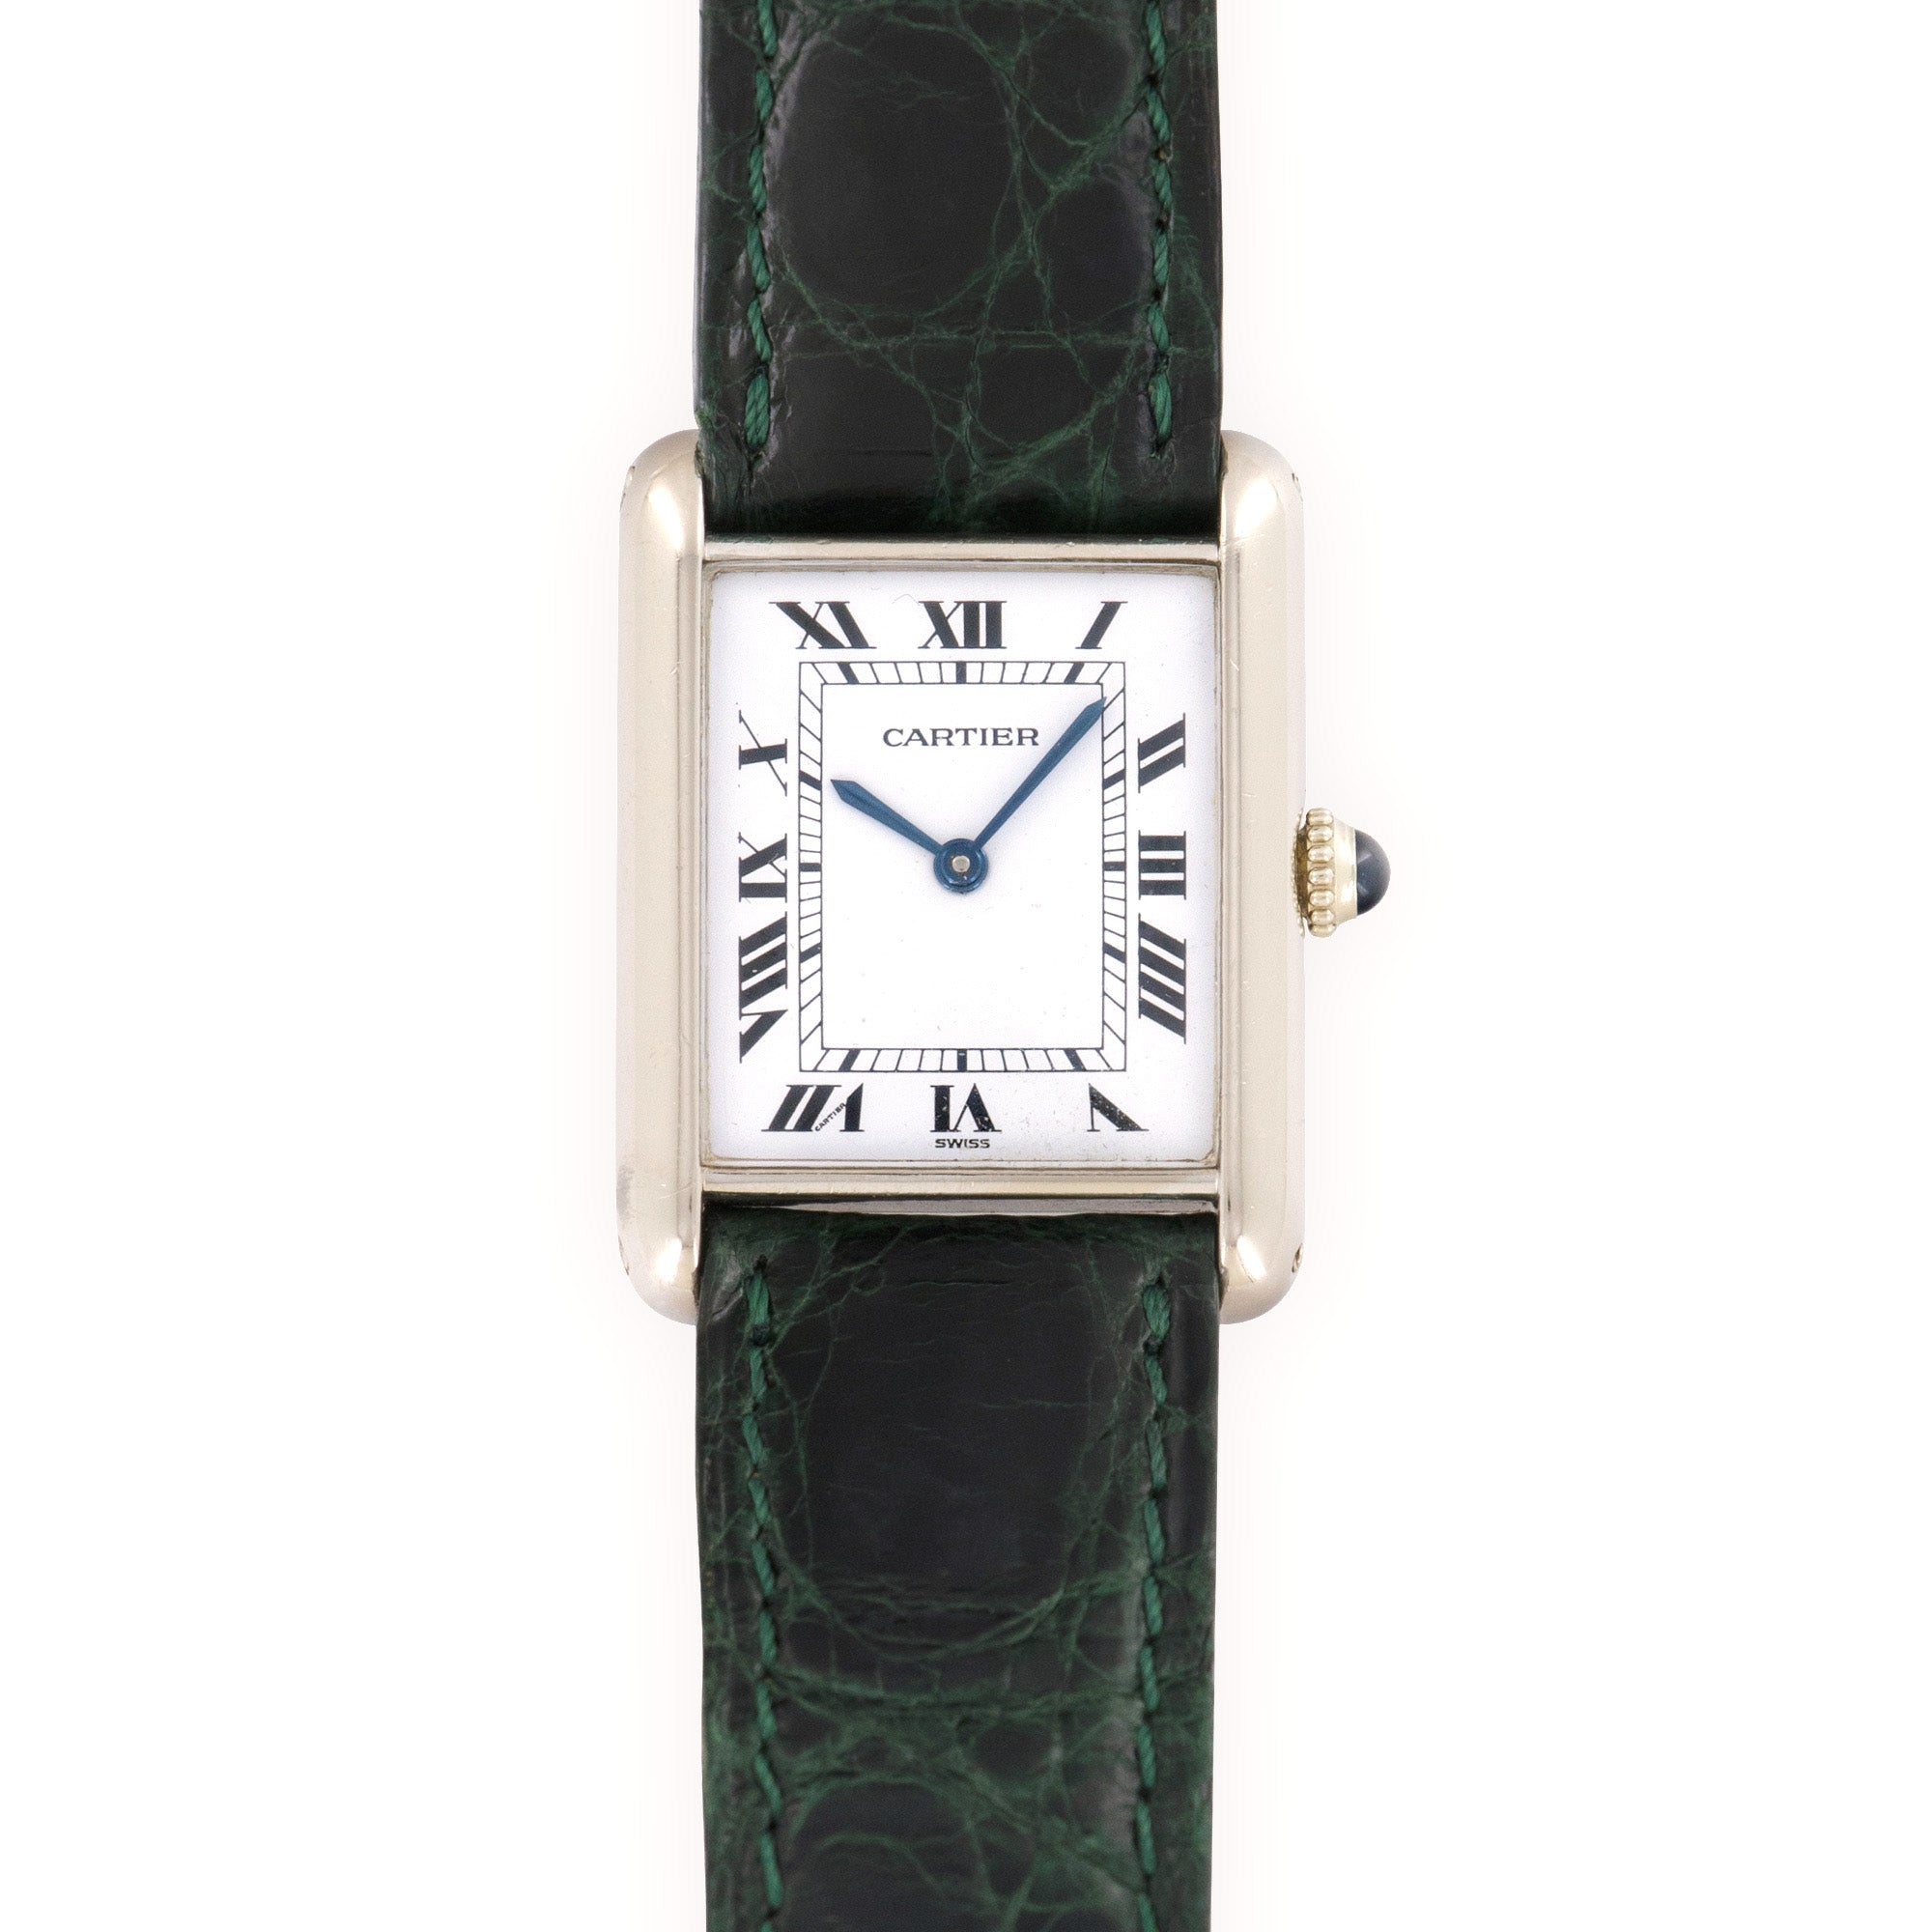 Cartier - Cartier White Gold Tank Manual-Wind Watch - The Keystone Watches